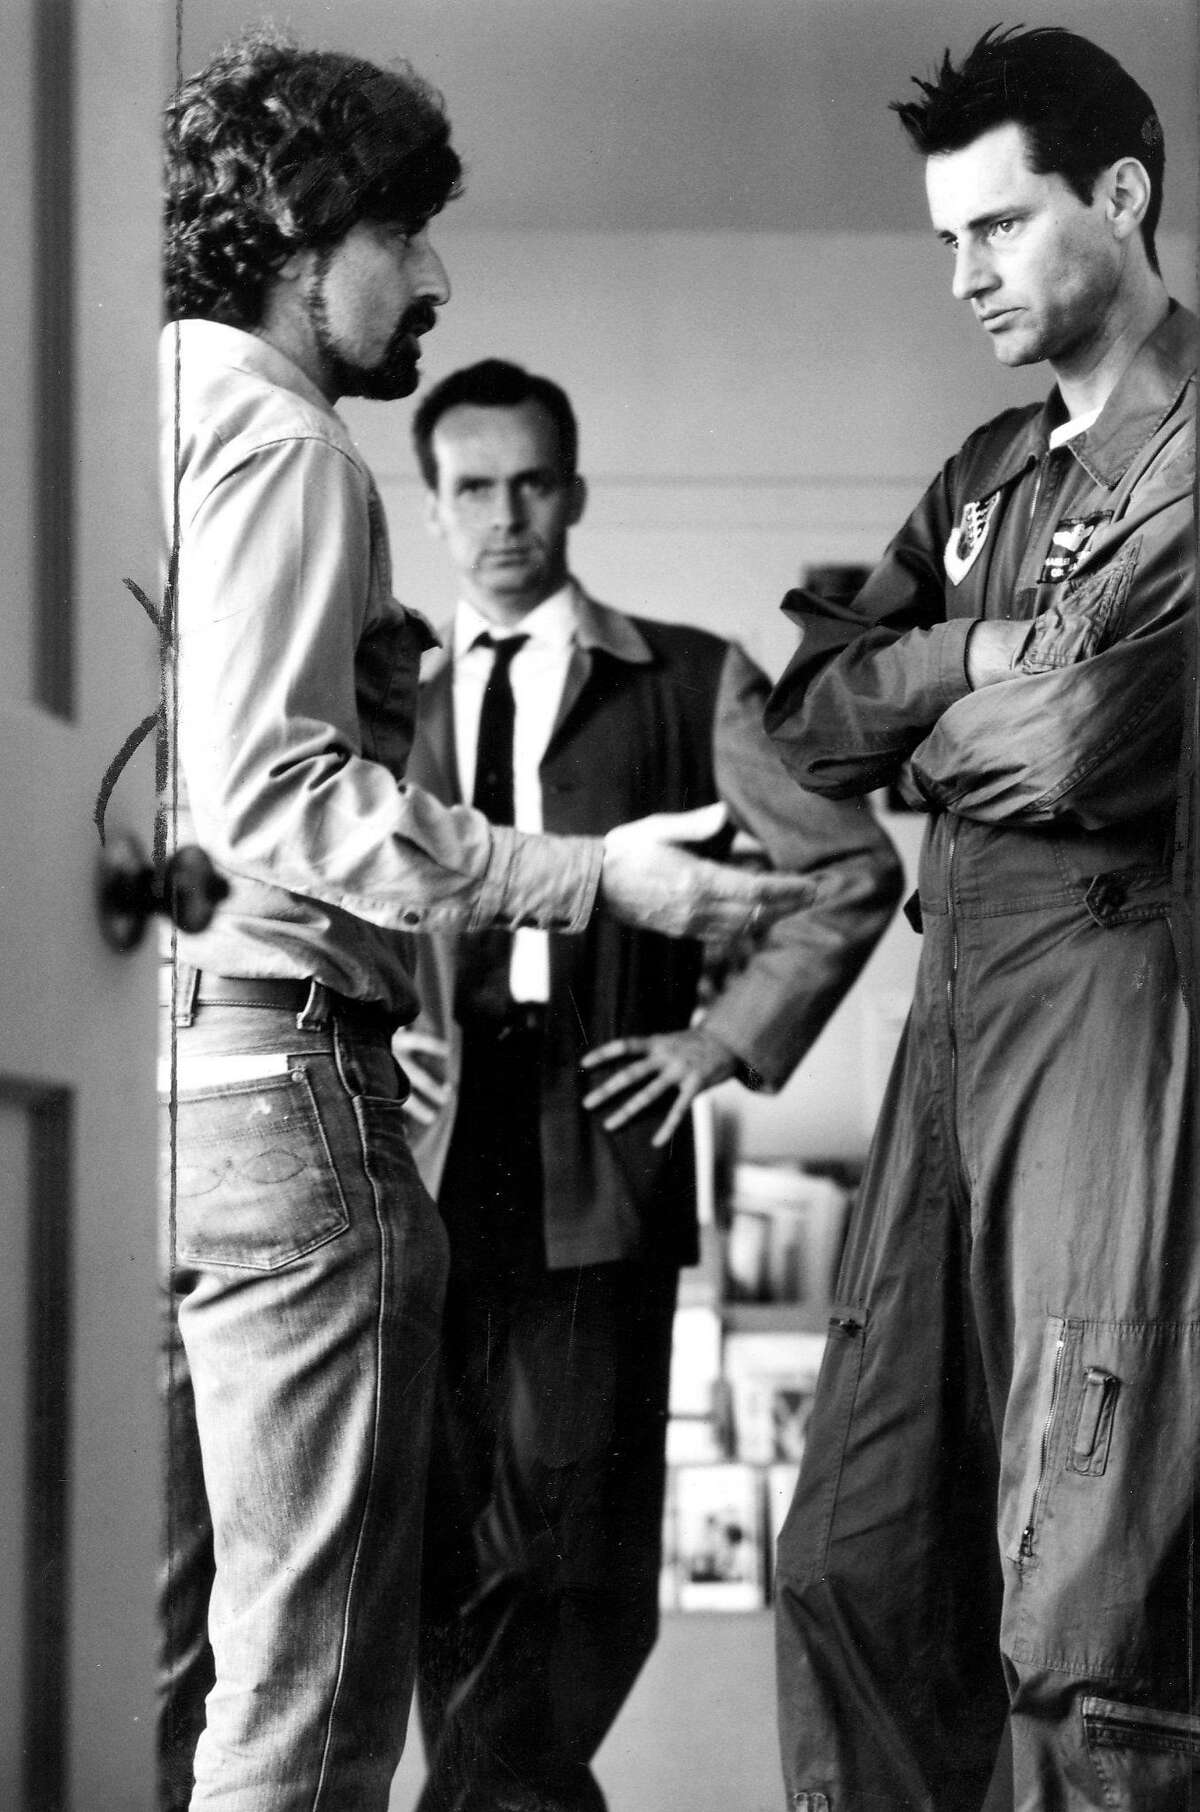 Sam Shepard (r) and Phillp Kaufman on the set of "The Right Stuff Handout